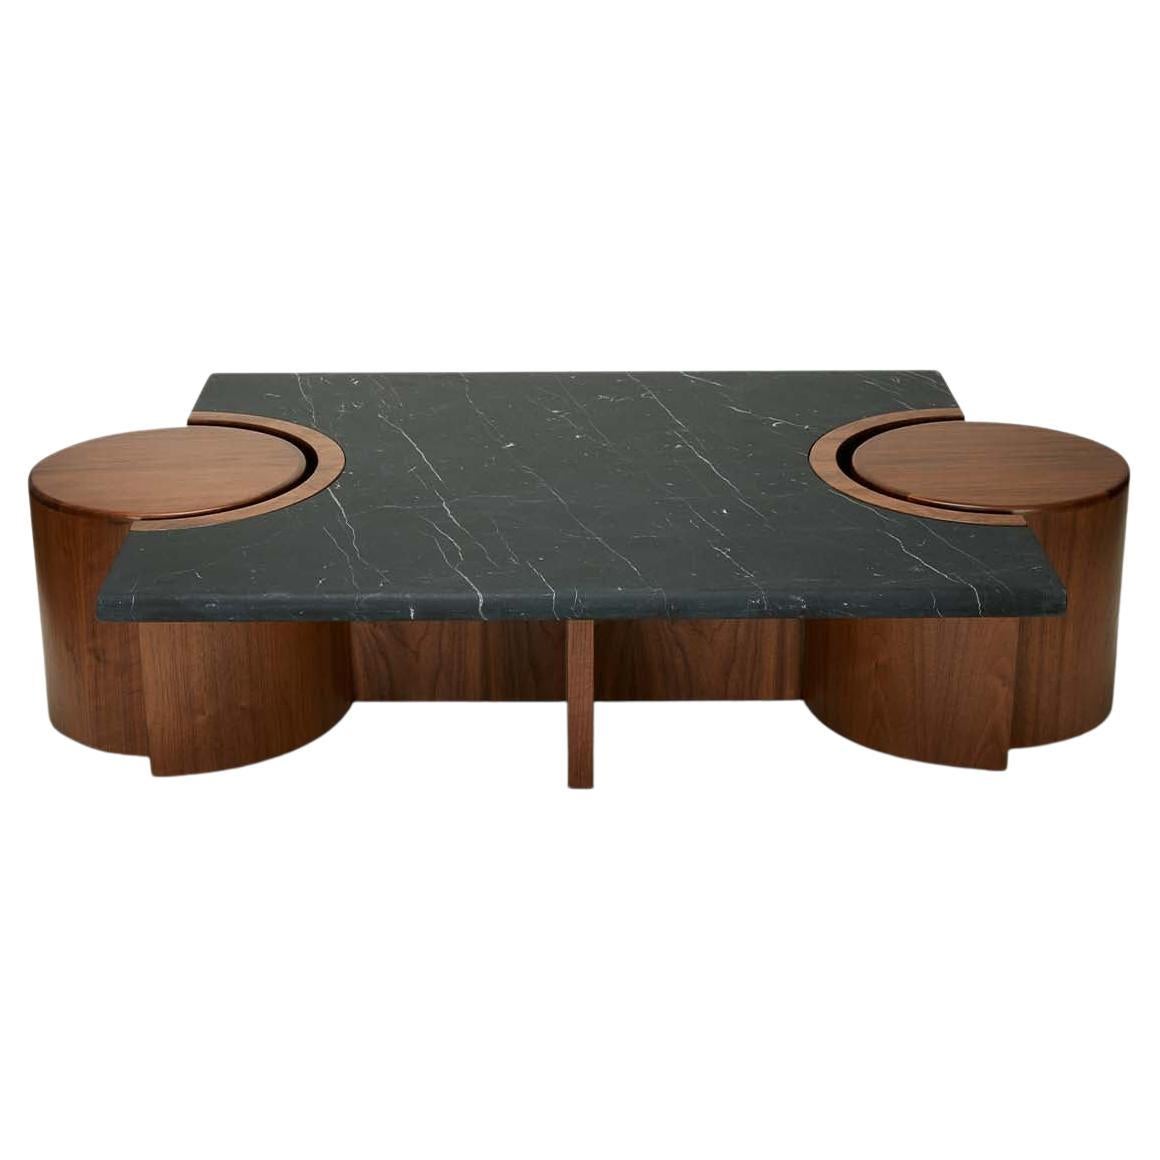 Black Marble and Walnut Prospect Coffee Table by Lawson-Fenning For Sale